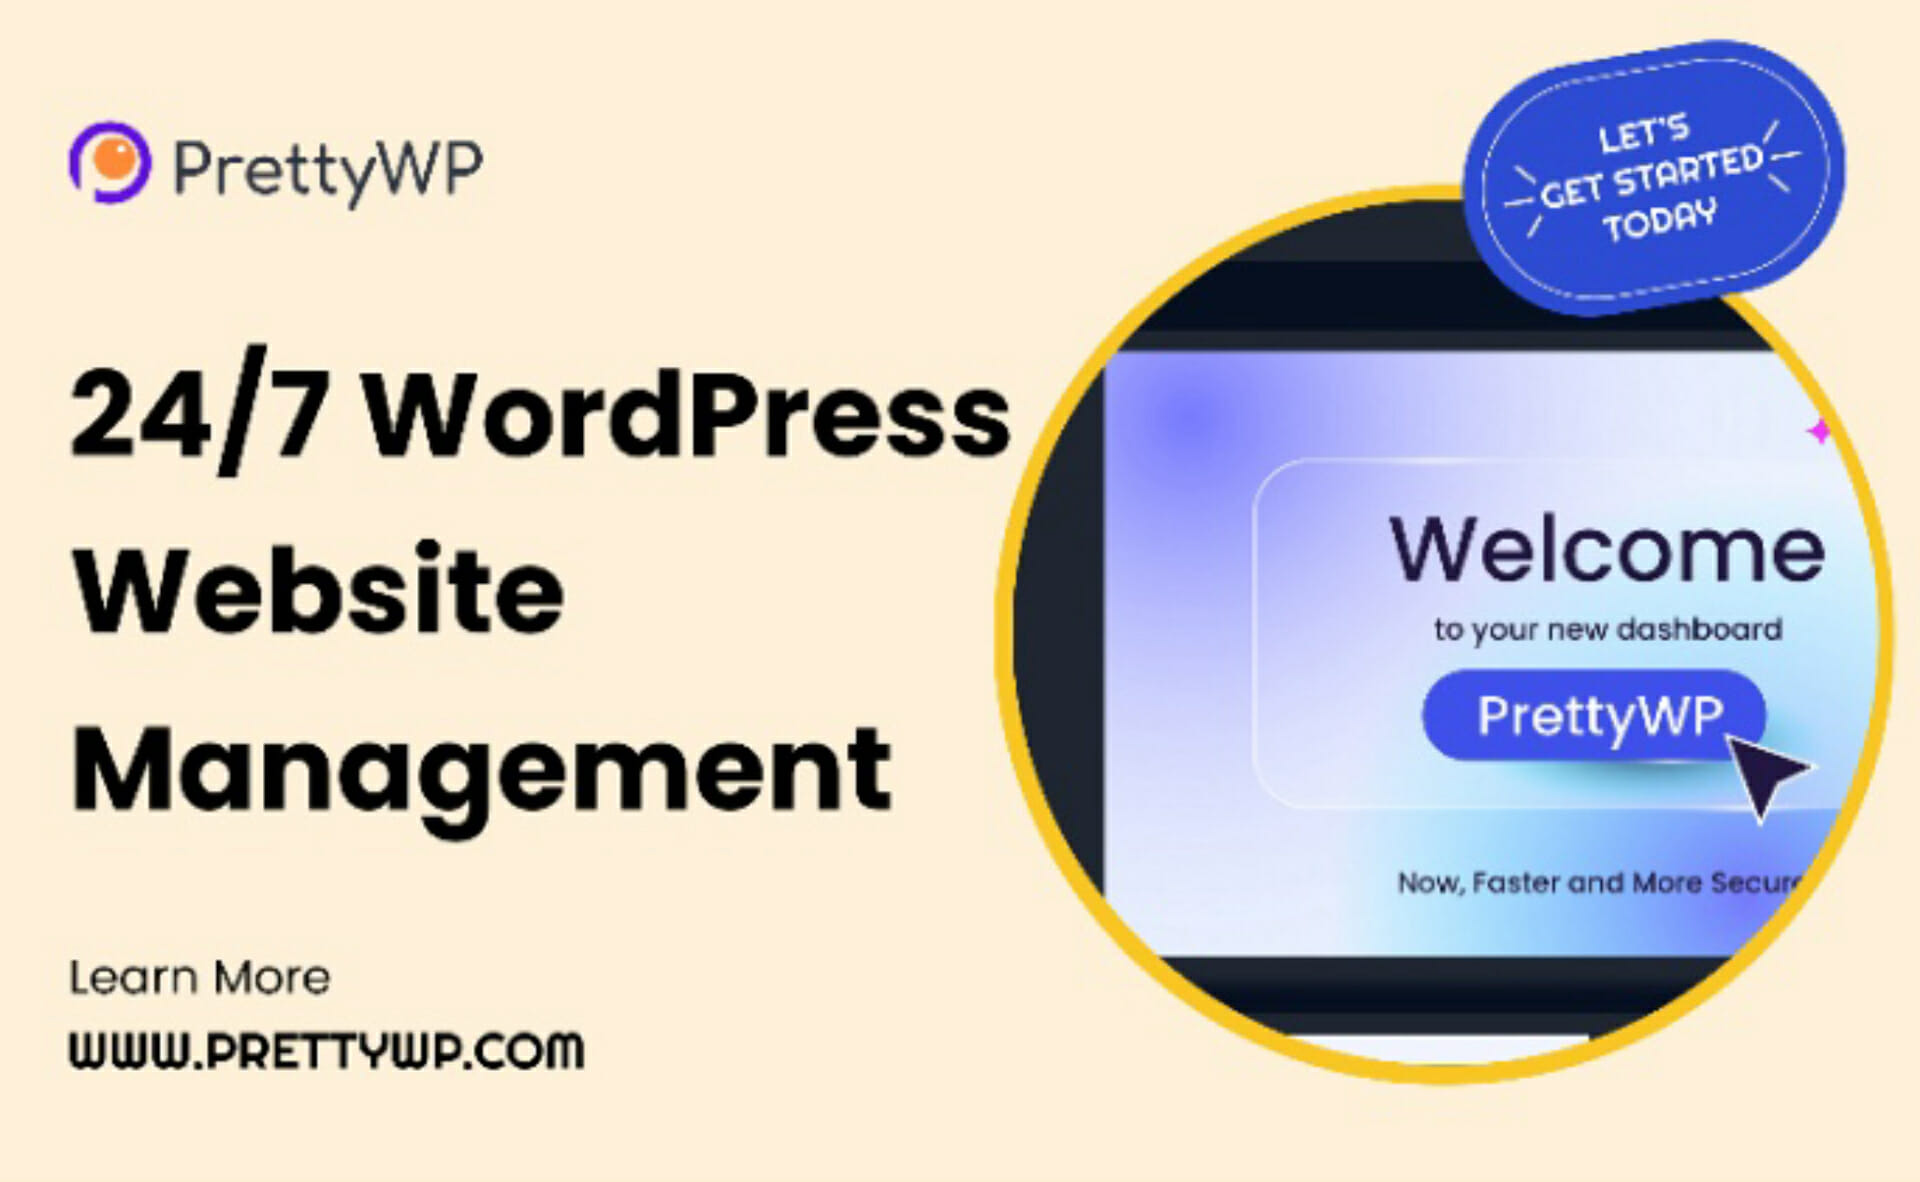 Lifetime Deal to PrettyWP – 24/7 WordPress Website Management: Migration for $59